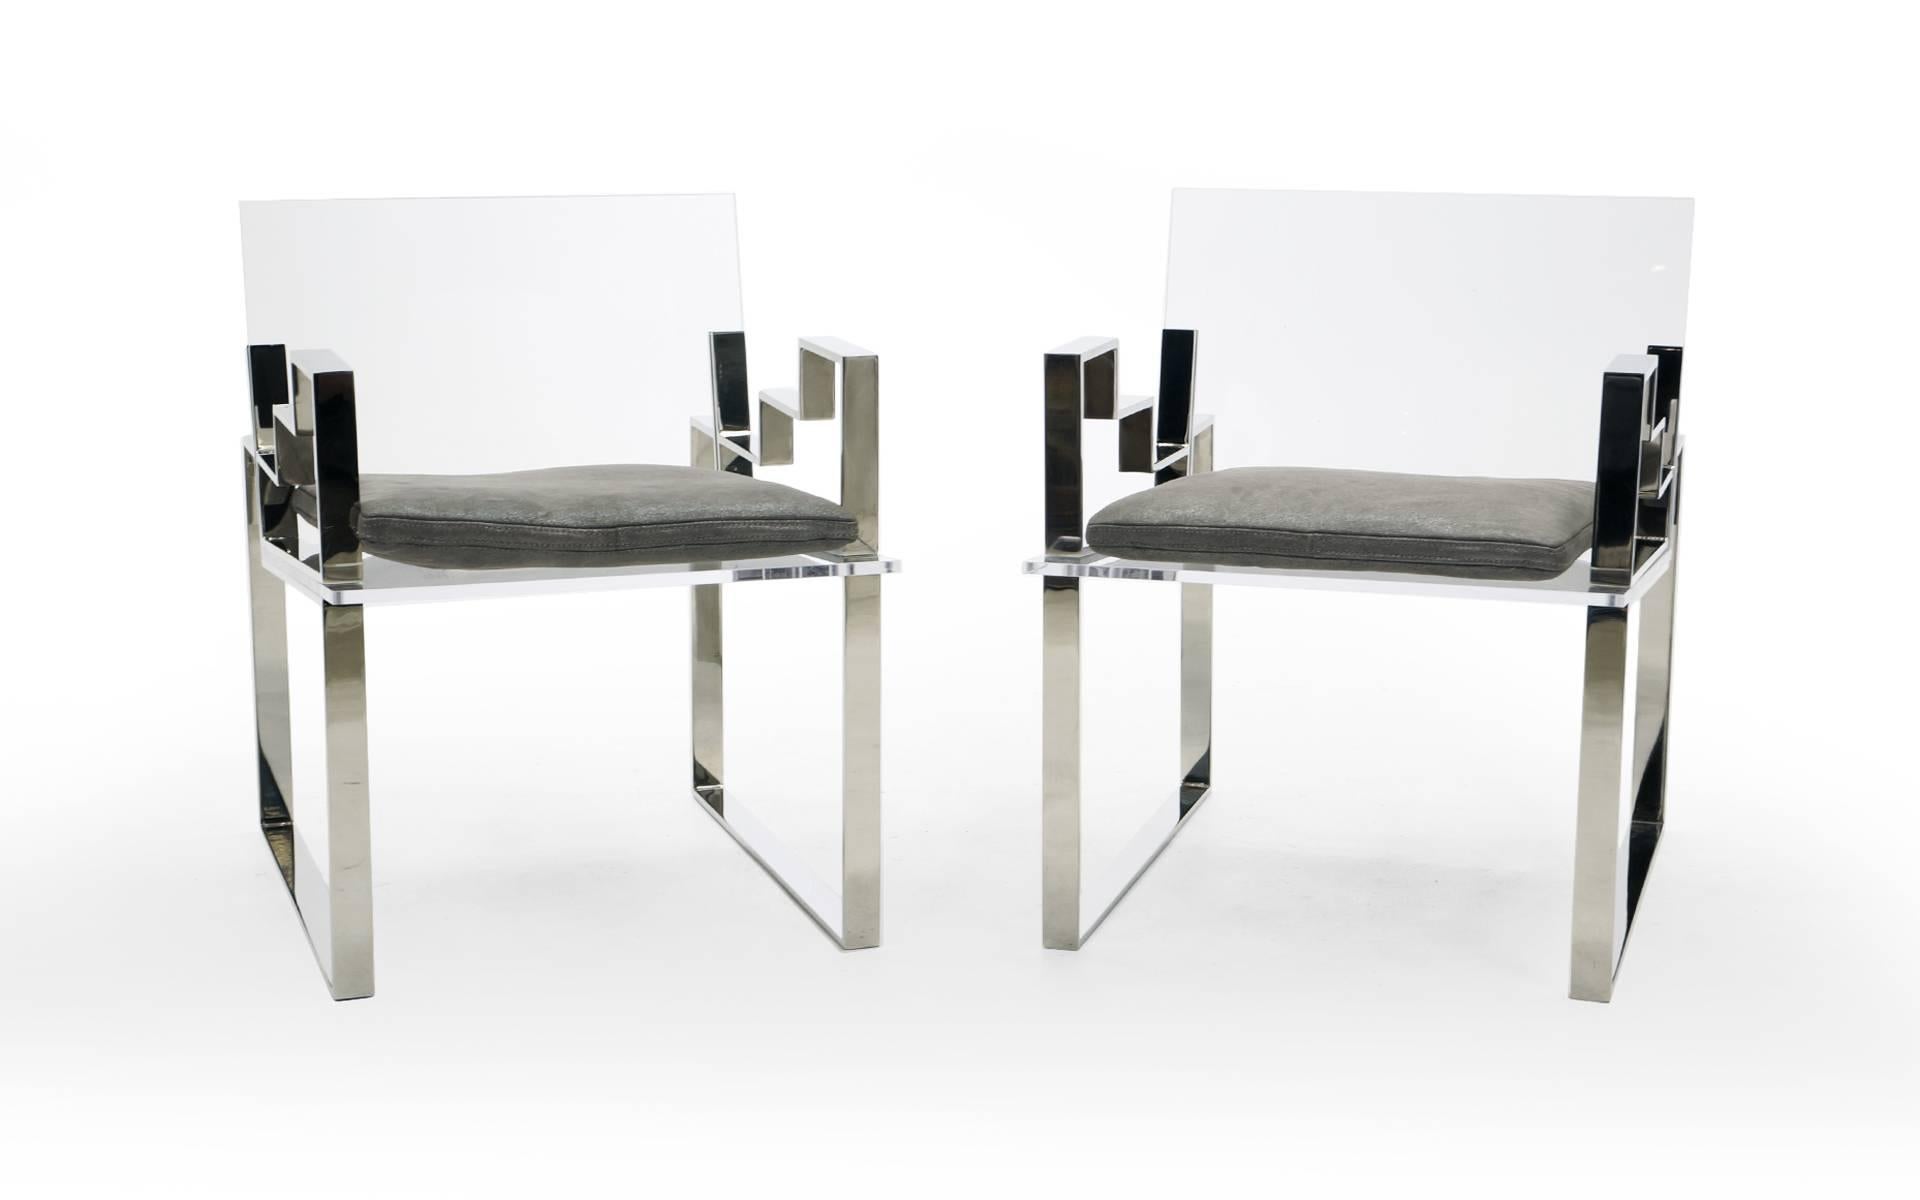 Late 20th Century Pair of Lucite and Chrome Lounge Chairs Hand Signed by Charles Hollis Jones 1984 For Sale